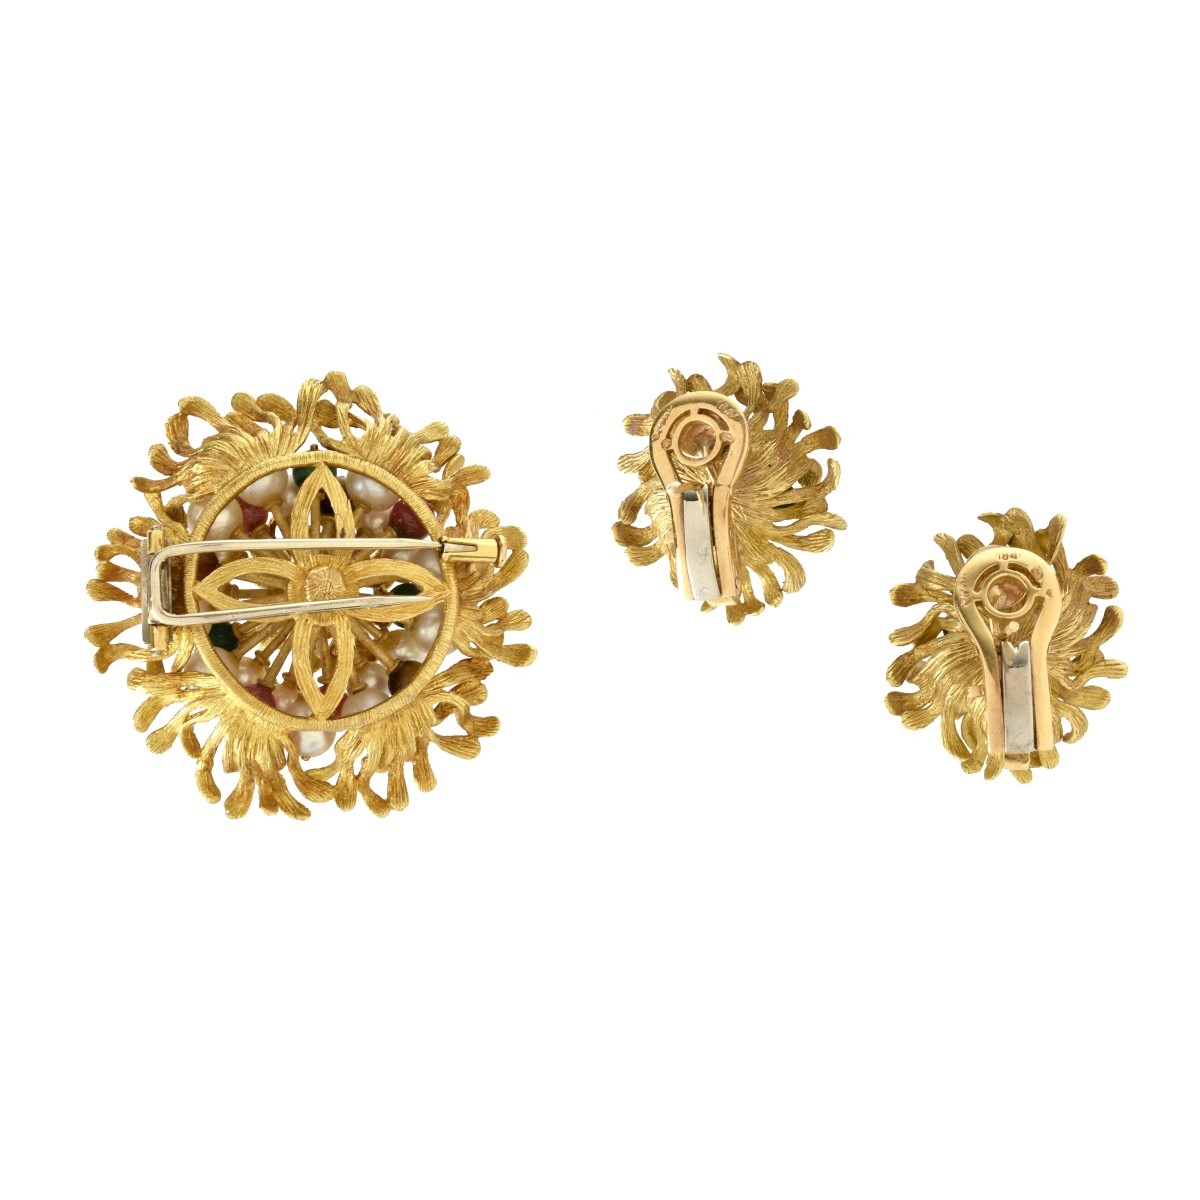 Spitzer and Furman Brooch and Earrings